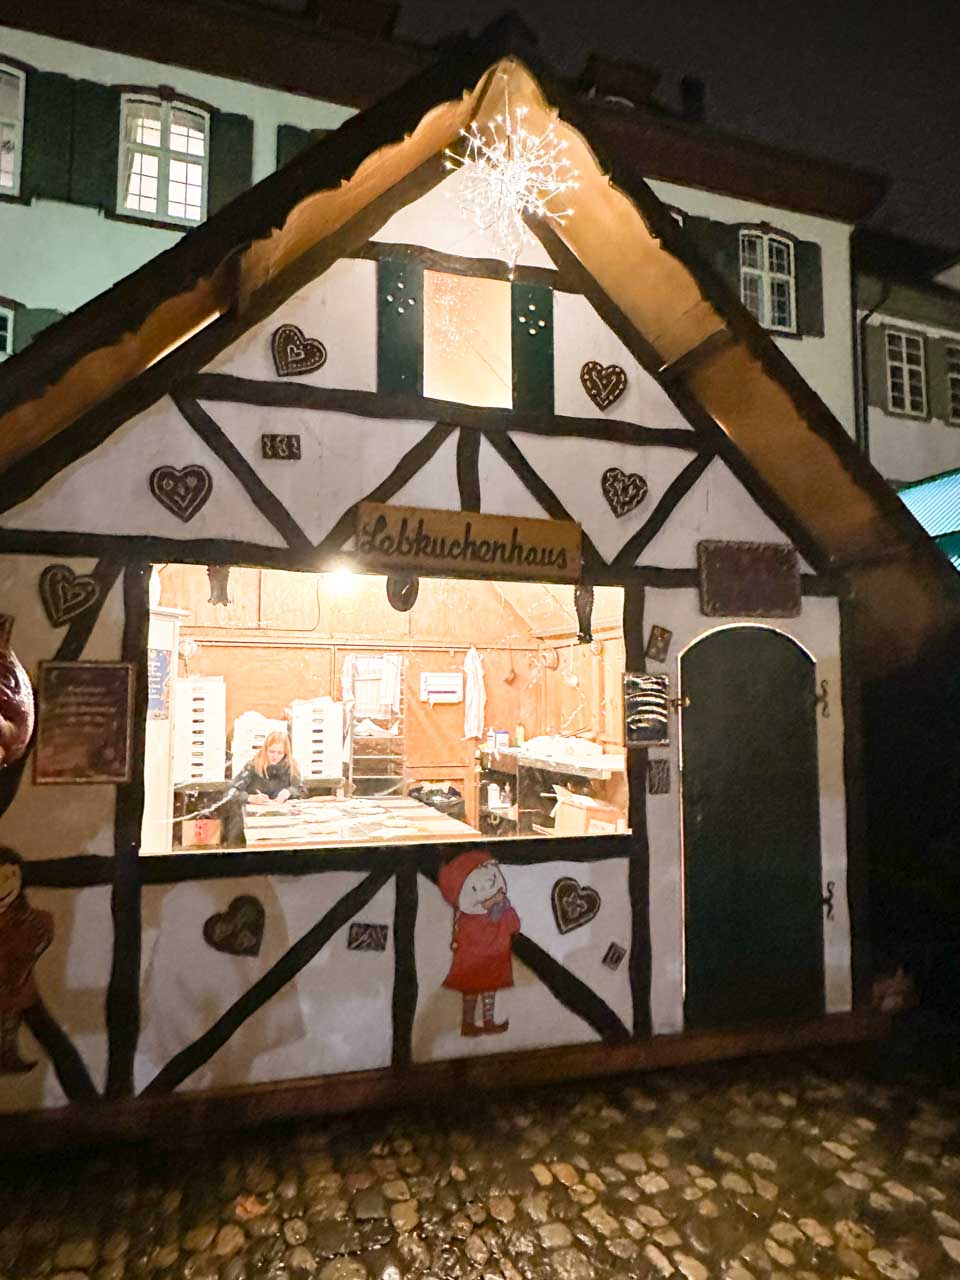 A gingerbread house stall at the Basel Christmas market with a large snowflake decoration